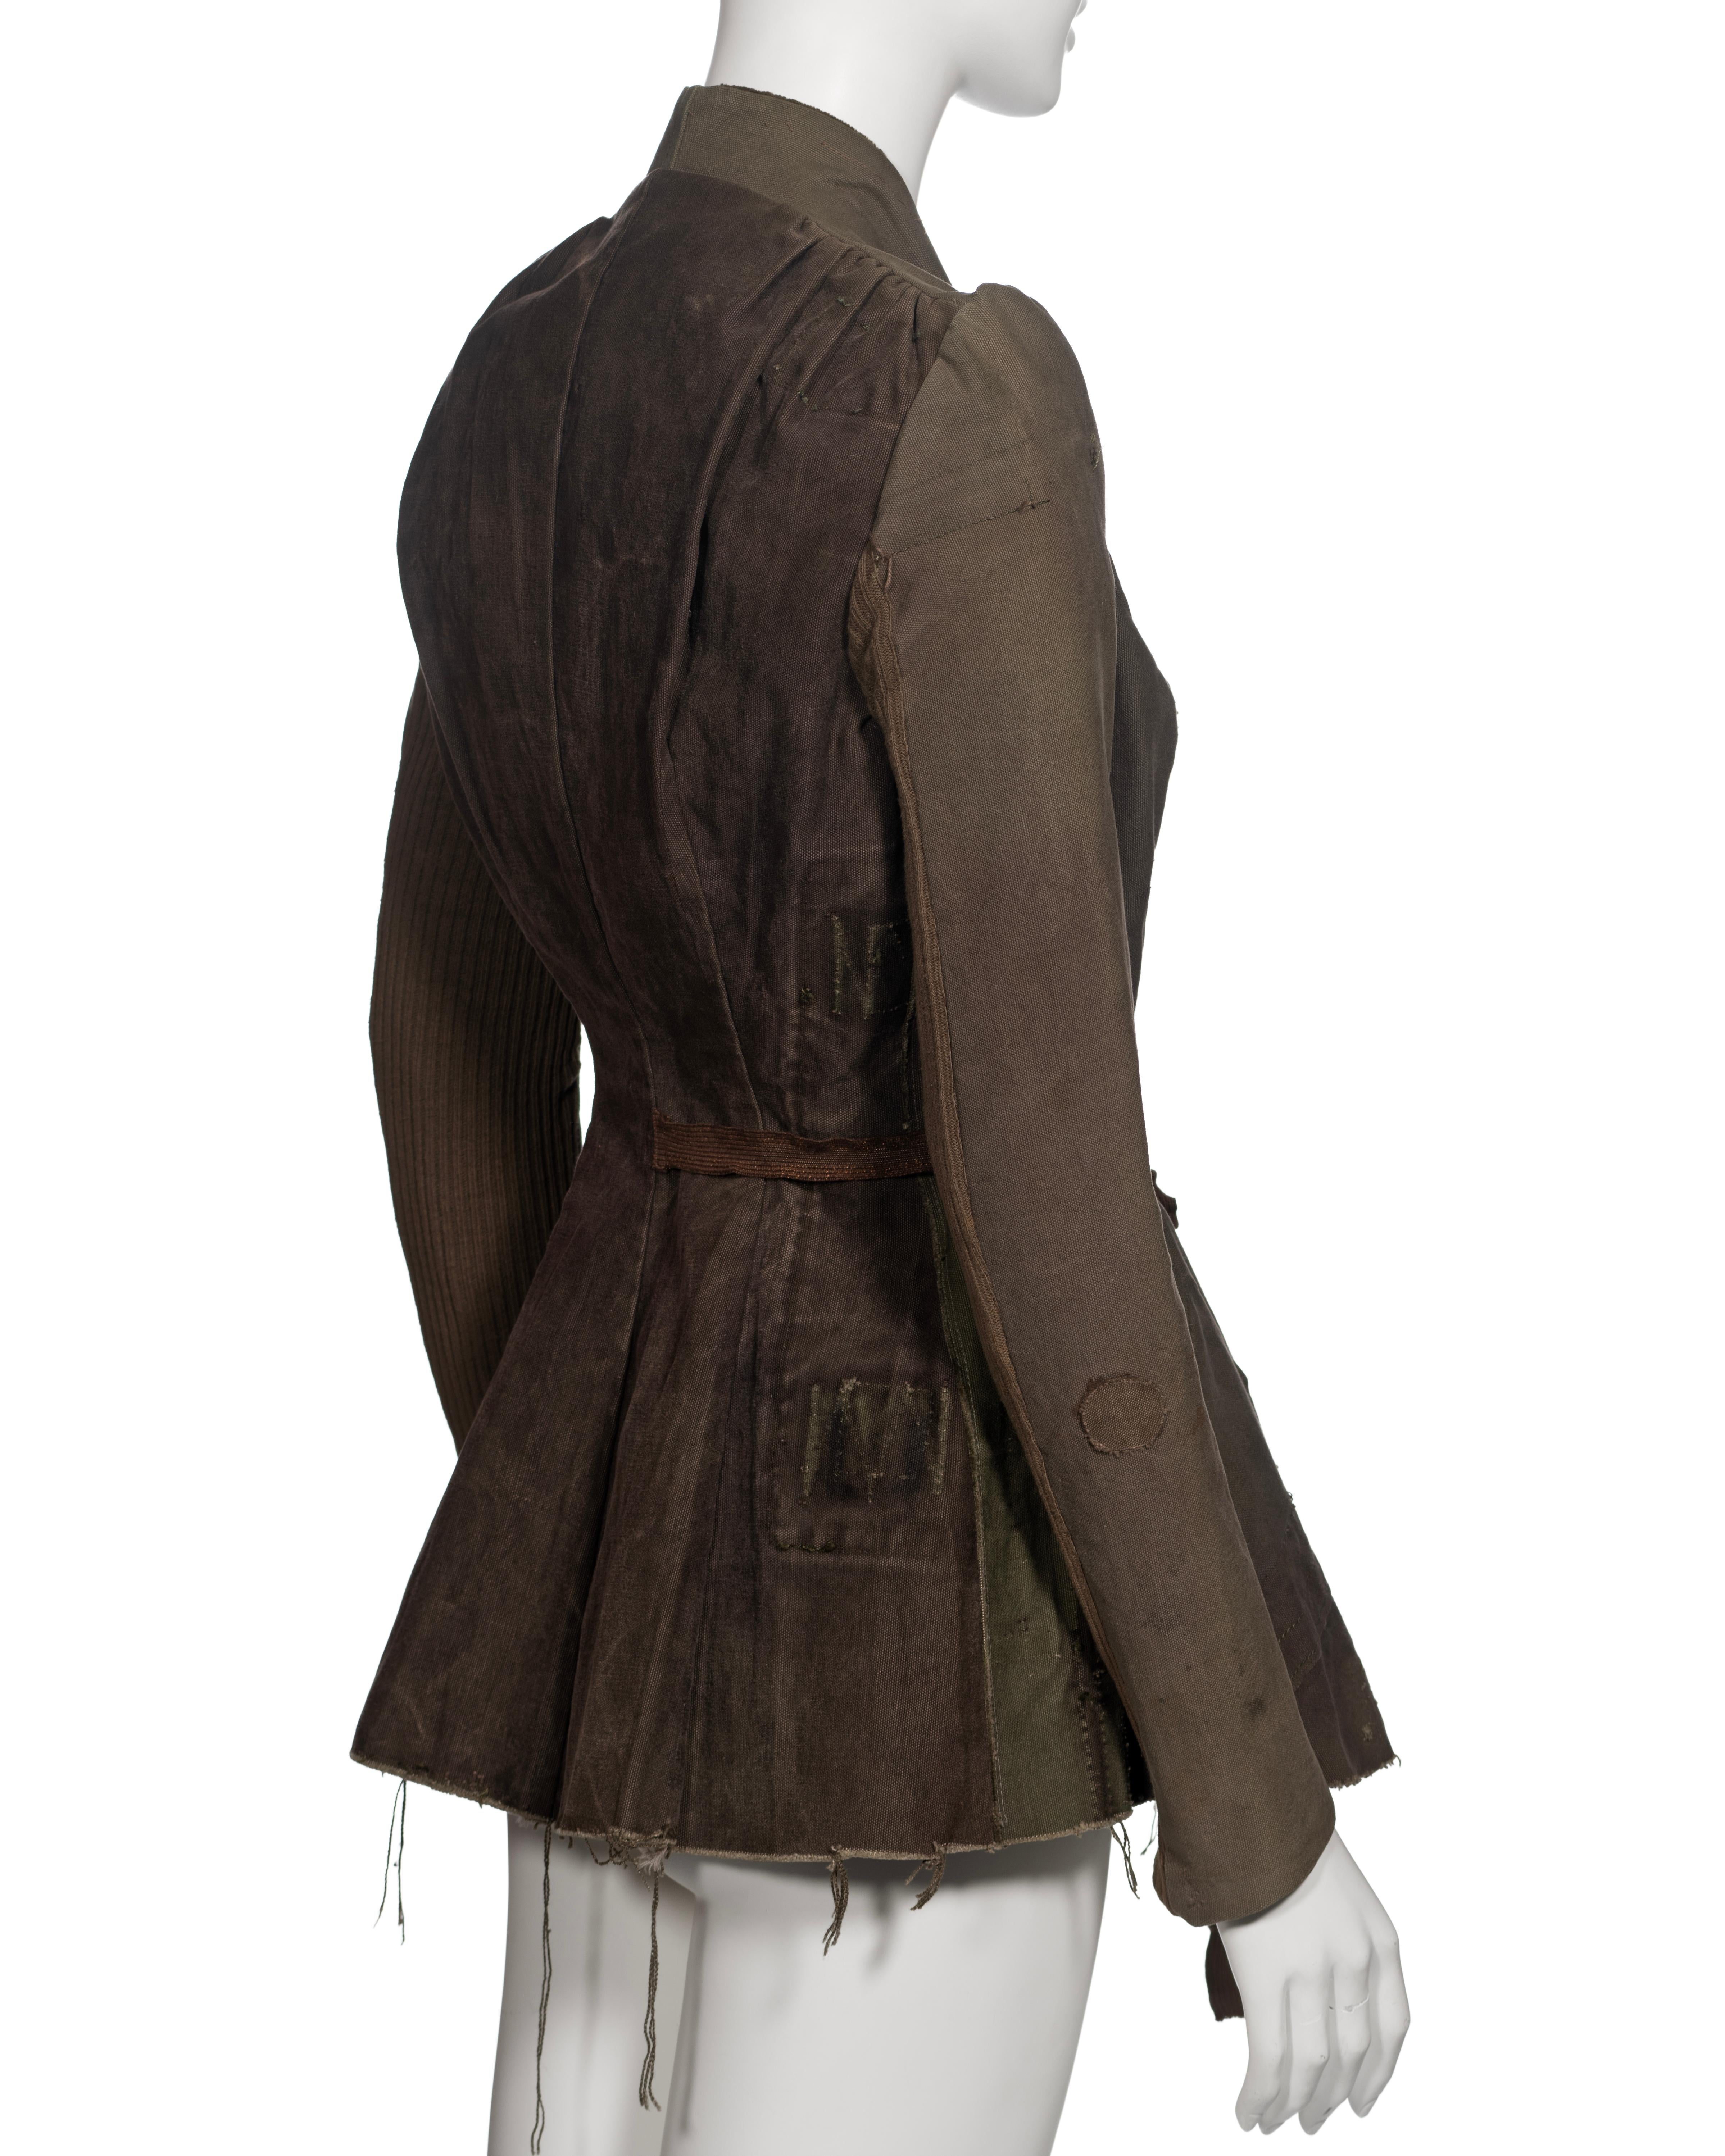 Rick Owens Jacket Made From Deconstructed Military Surplus Bags, c. 1998 6